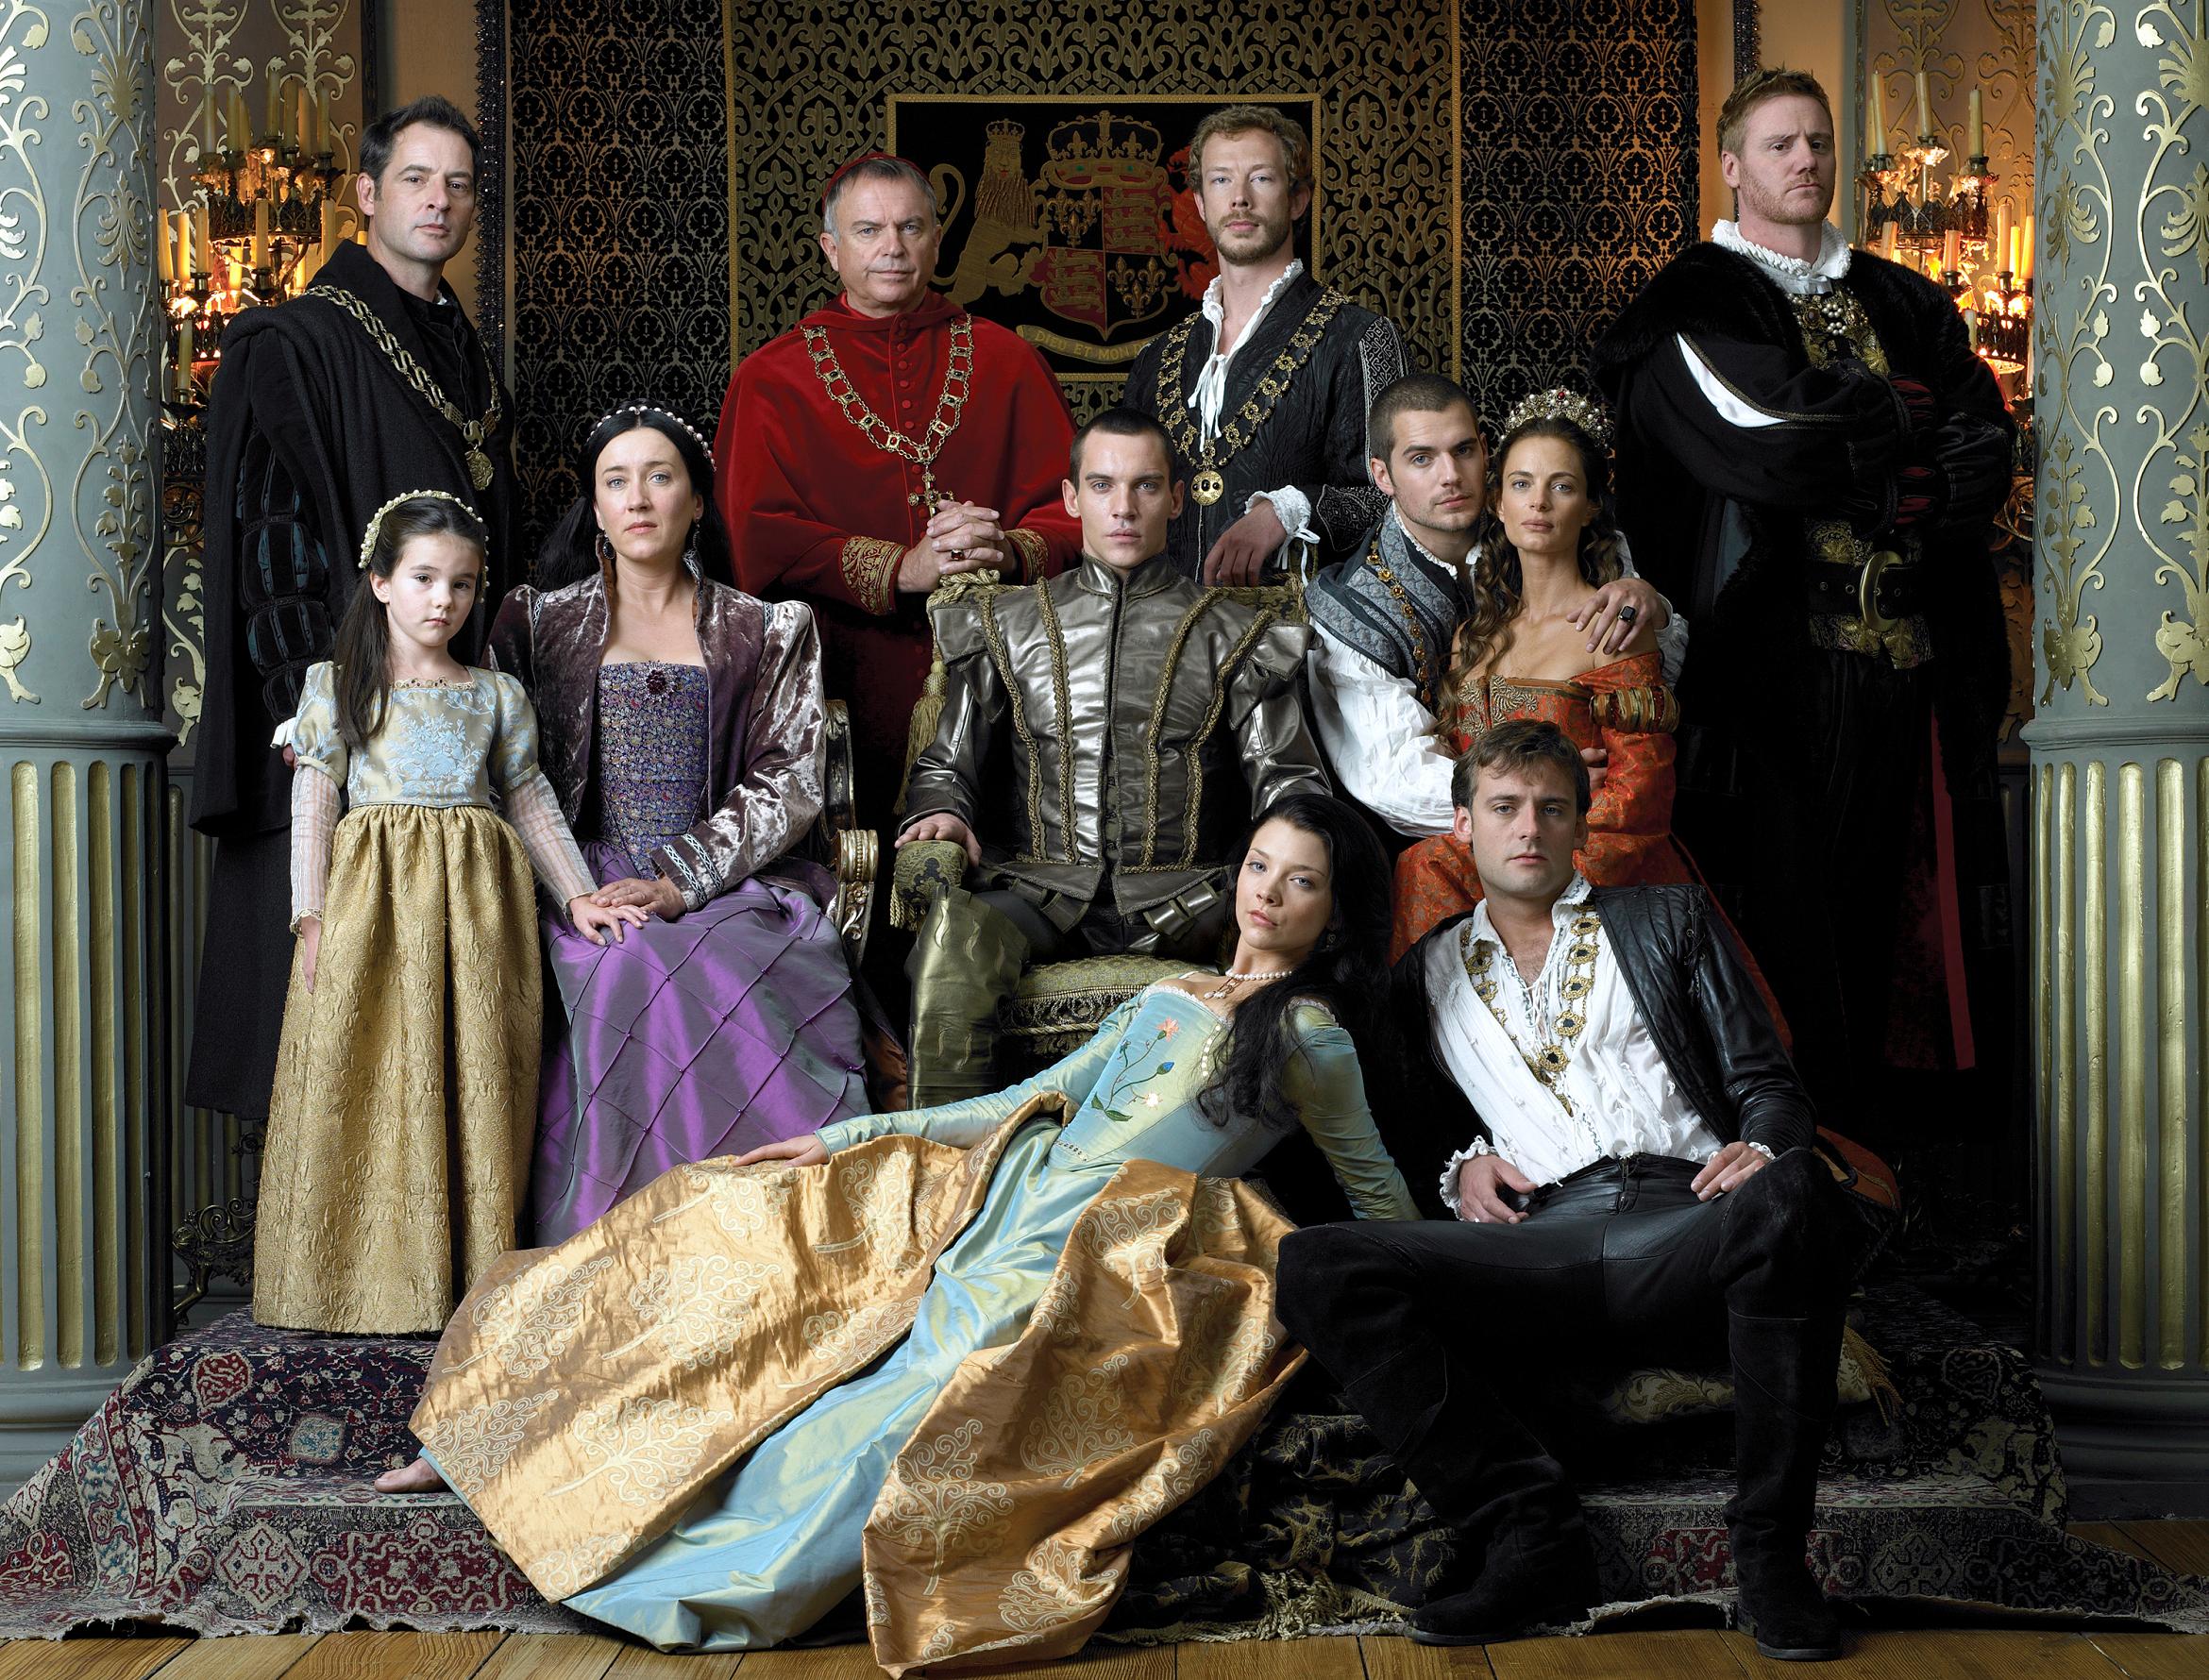 Sitting-front (left-right) Natalie Dormer as Anne Boleyn and Callum Blue as Knivert. Sitting-middle (left-right): Blathnaid McKeown as Princess Mary, Maria Doyle Kennedy as Queen Katherine, Jonathan Rhys Meyers as Henry VIII, Henry Cavill as Charles Brandon, and Gabrielle Anwar as Princess Margaret. Standing (left-right): Jeremy Northam as Sir Thomas Moore, Sam Neill as Cardinal Wolsey, Kris Holden-Ried is William Compton and Steven Waddington as Edward Stafford - Photo: Francois Rousseau/Showtime - Photo ID: em-tudors-portrait_group_of_ten